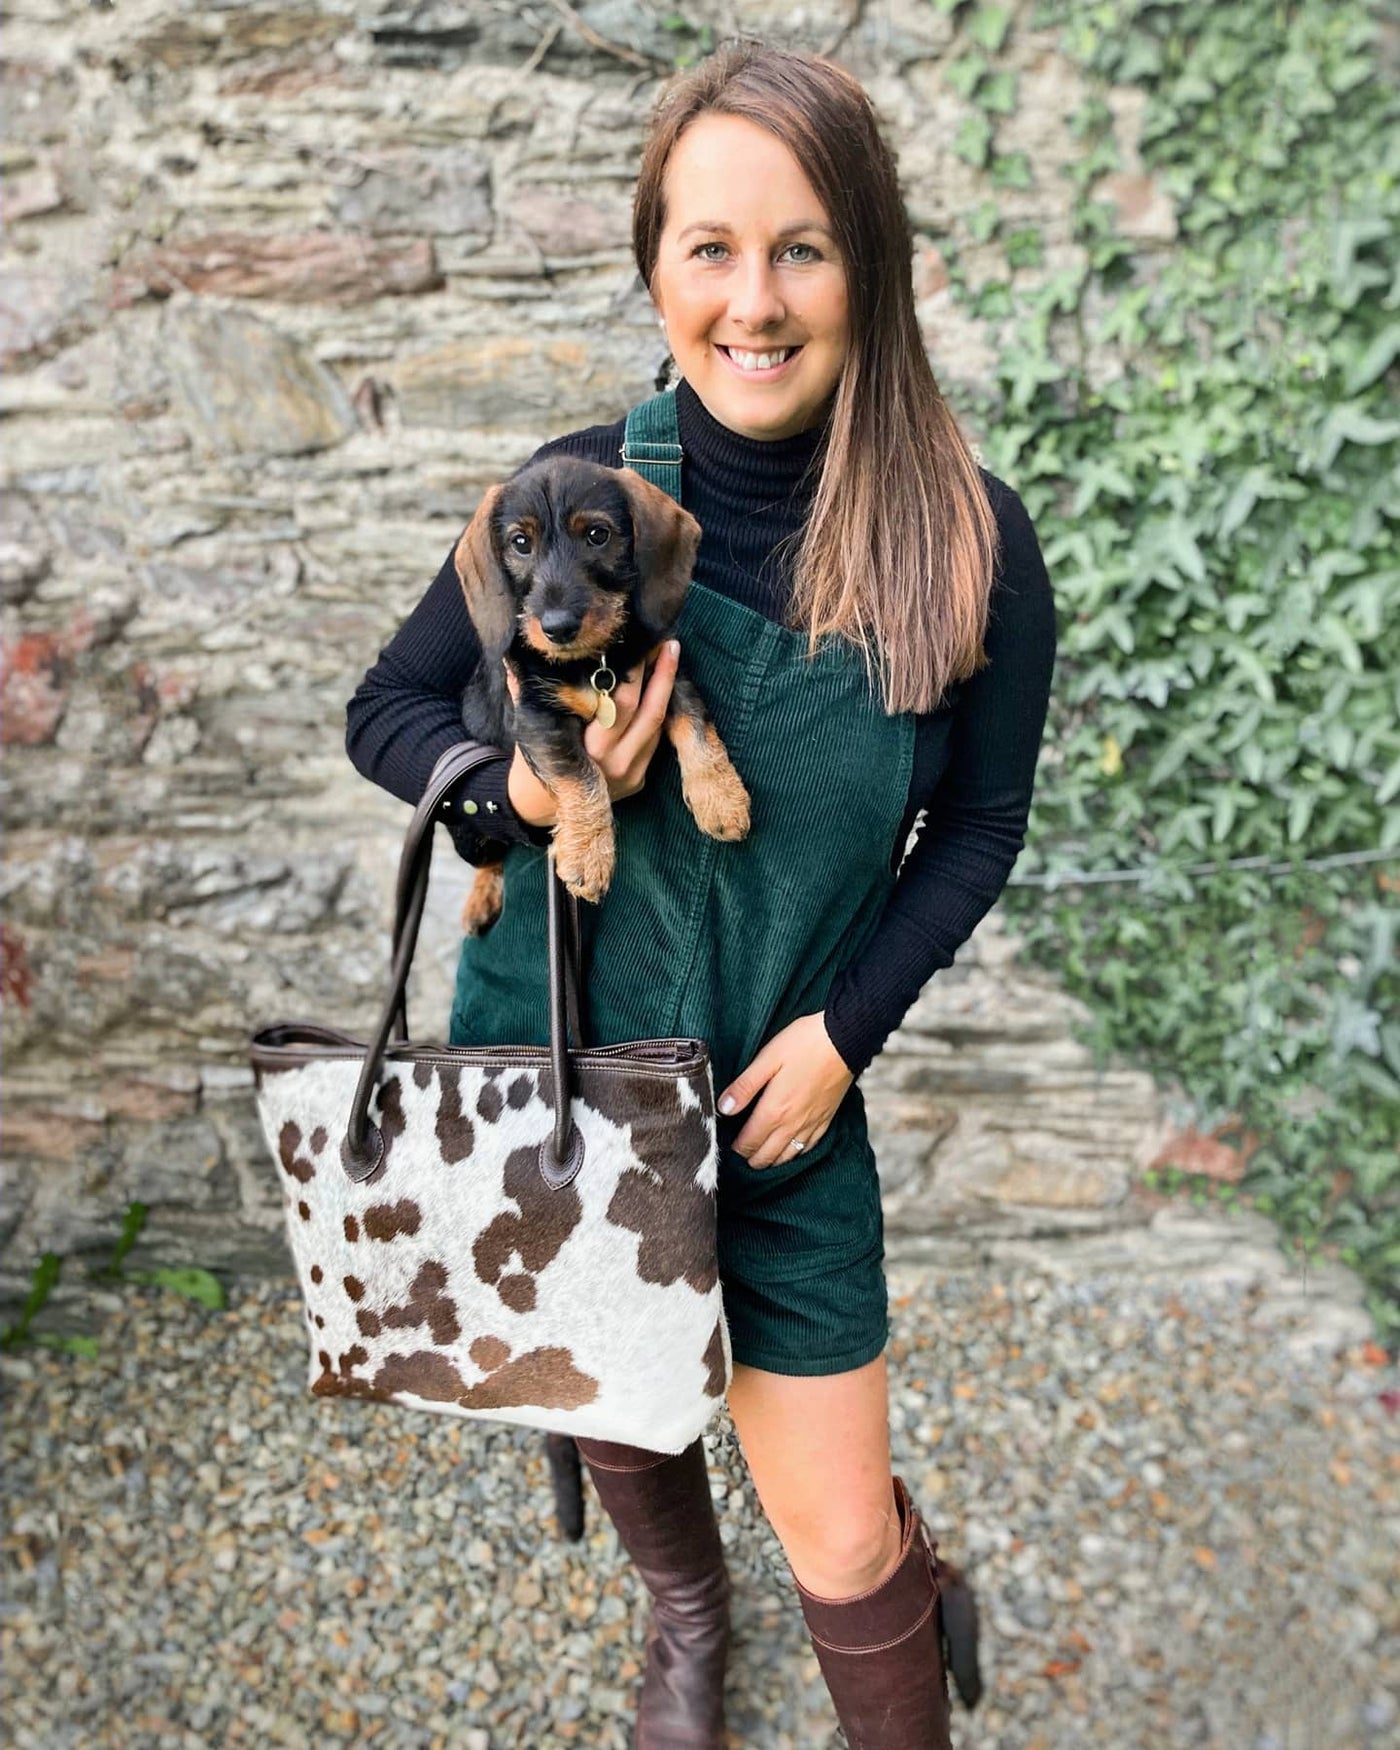 The upton handbag in brown cowhide styled by a customer with her gorgeous dog!